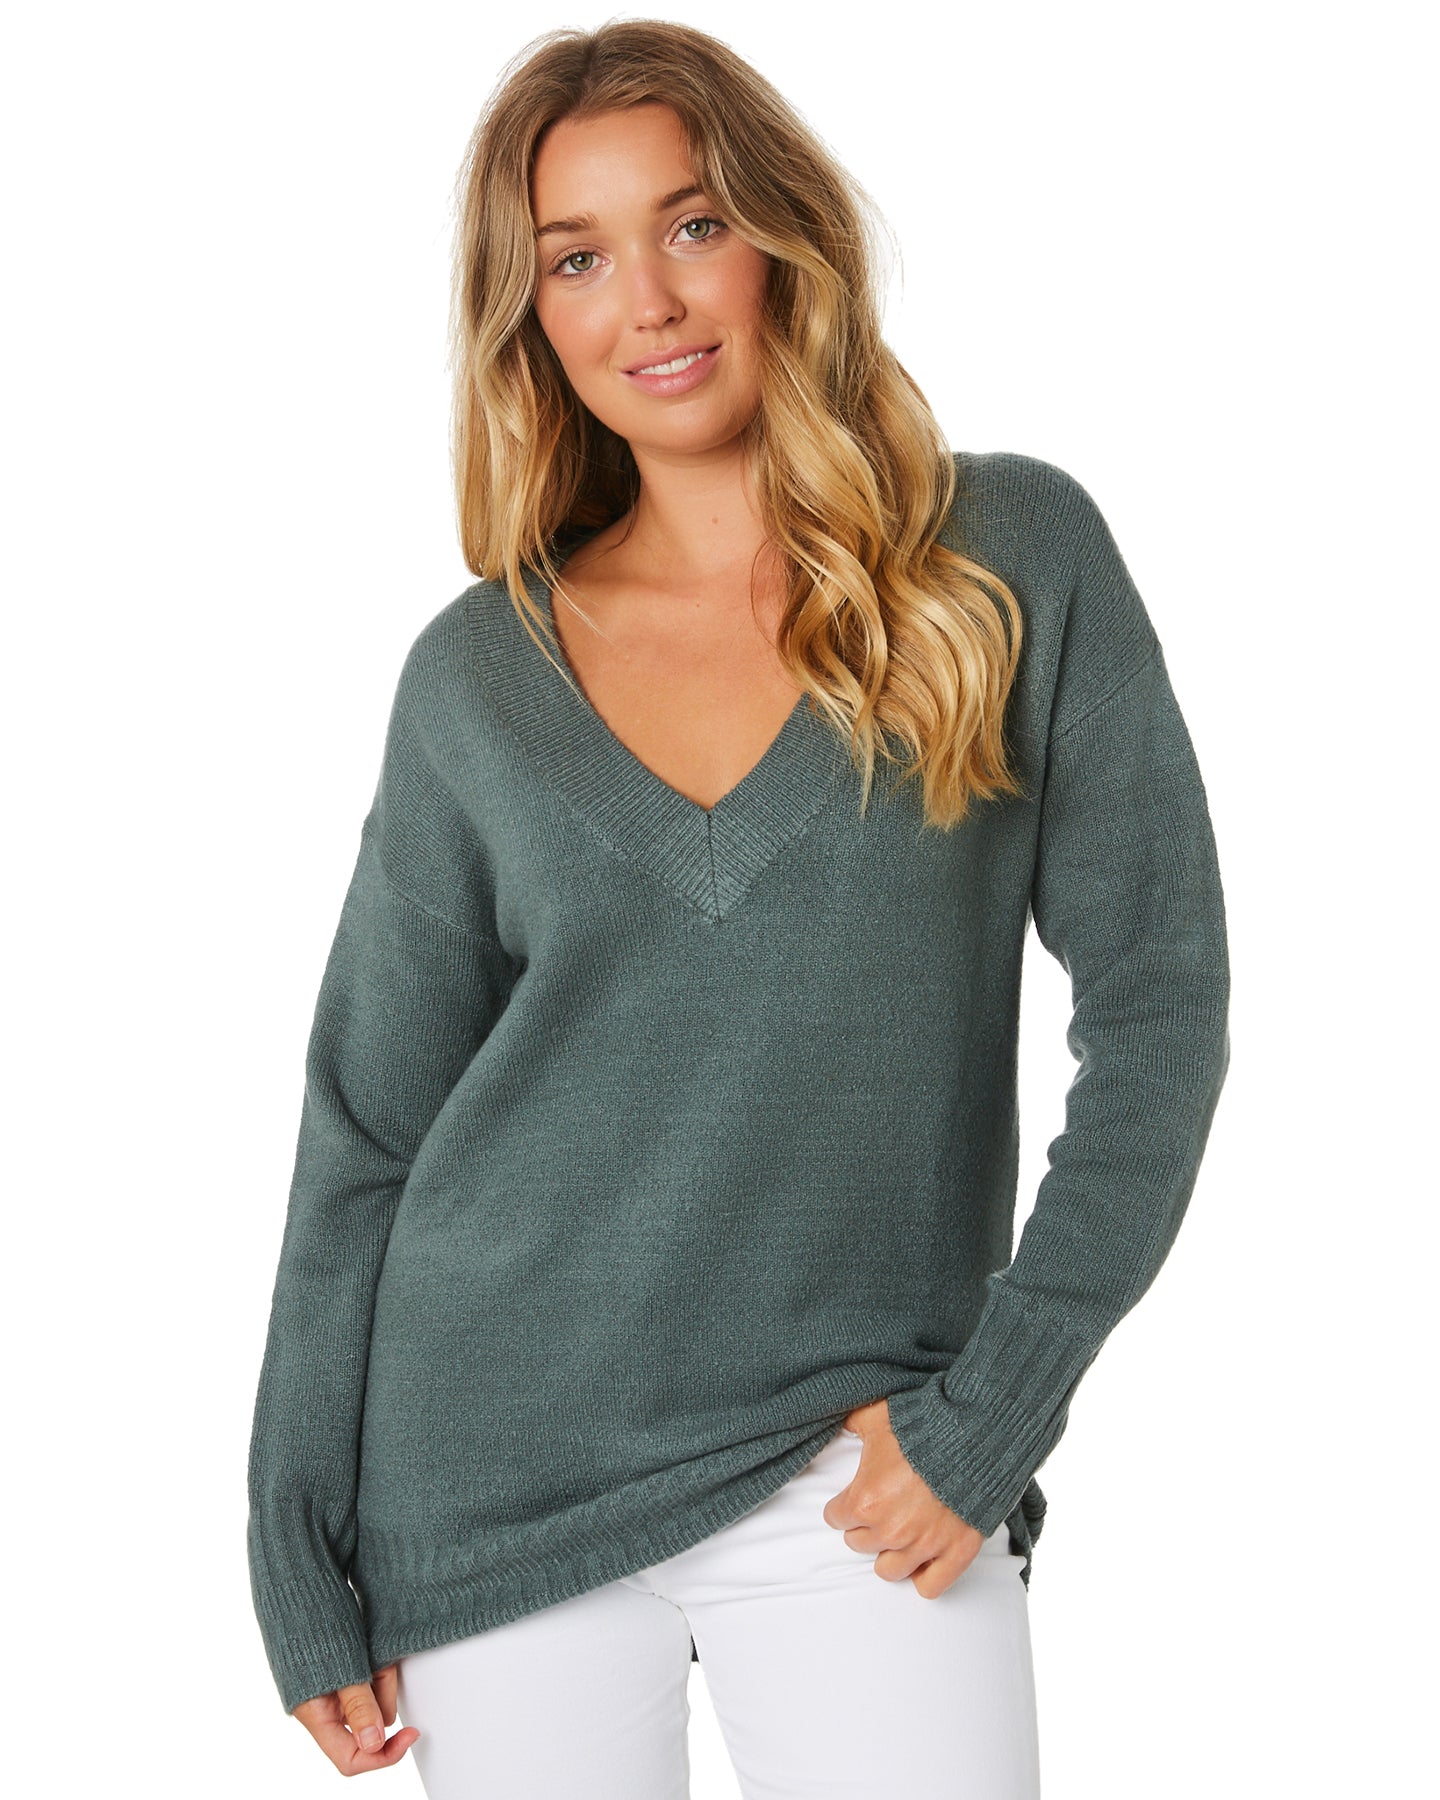 Rusty Together Vee Nick Knit Sweater